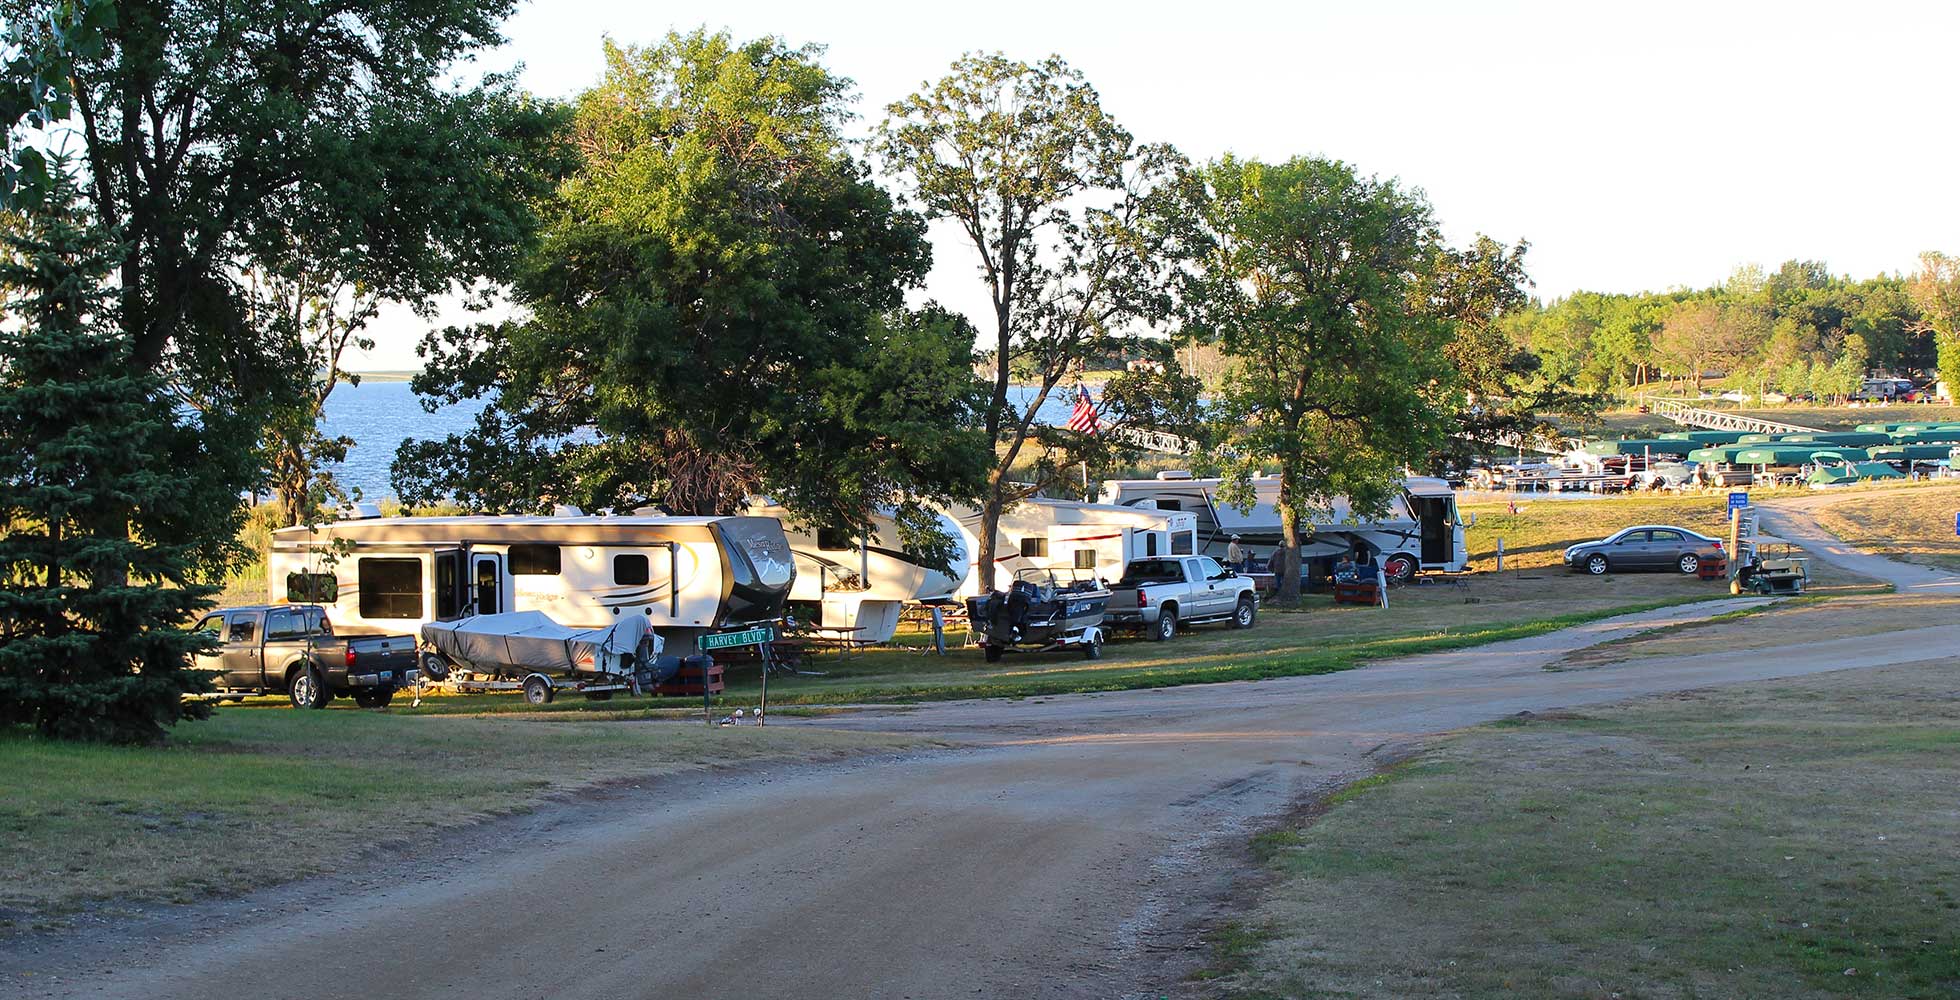 A line of RV’s and cars parked on a sunny day for camping at Eastbay Campground with close access to the lake and marina.